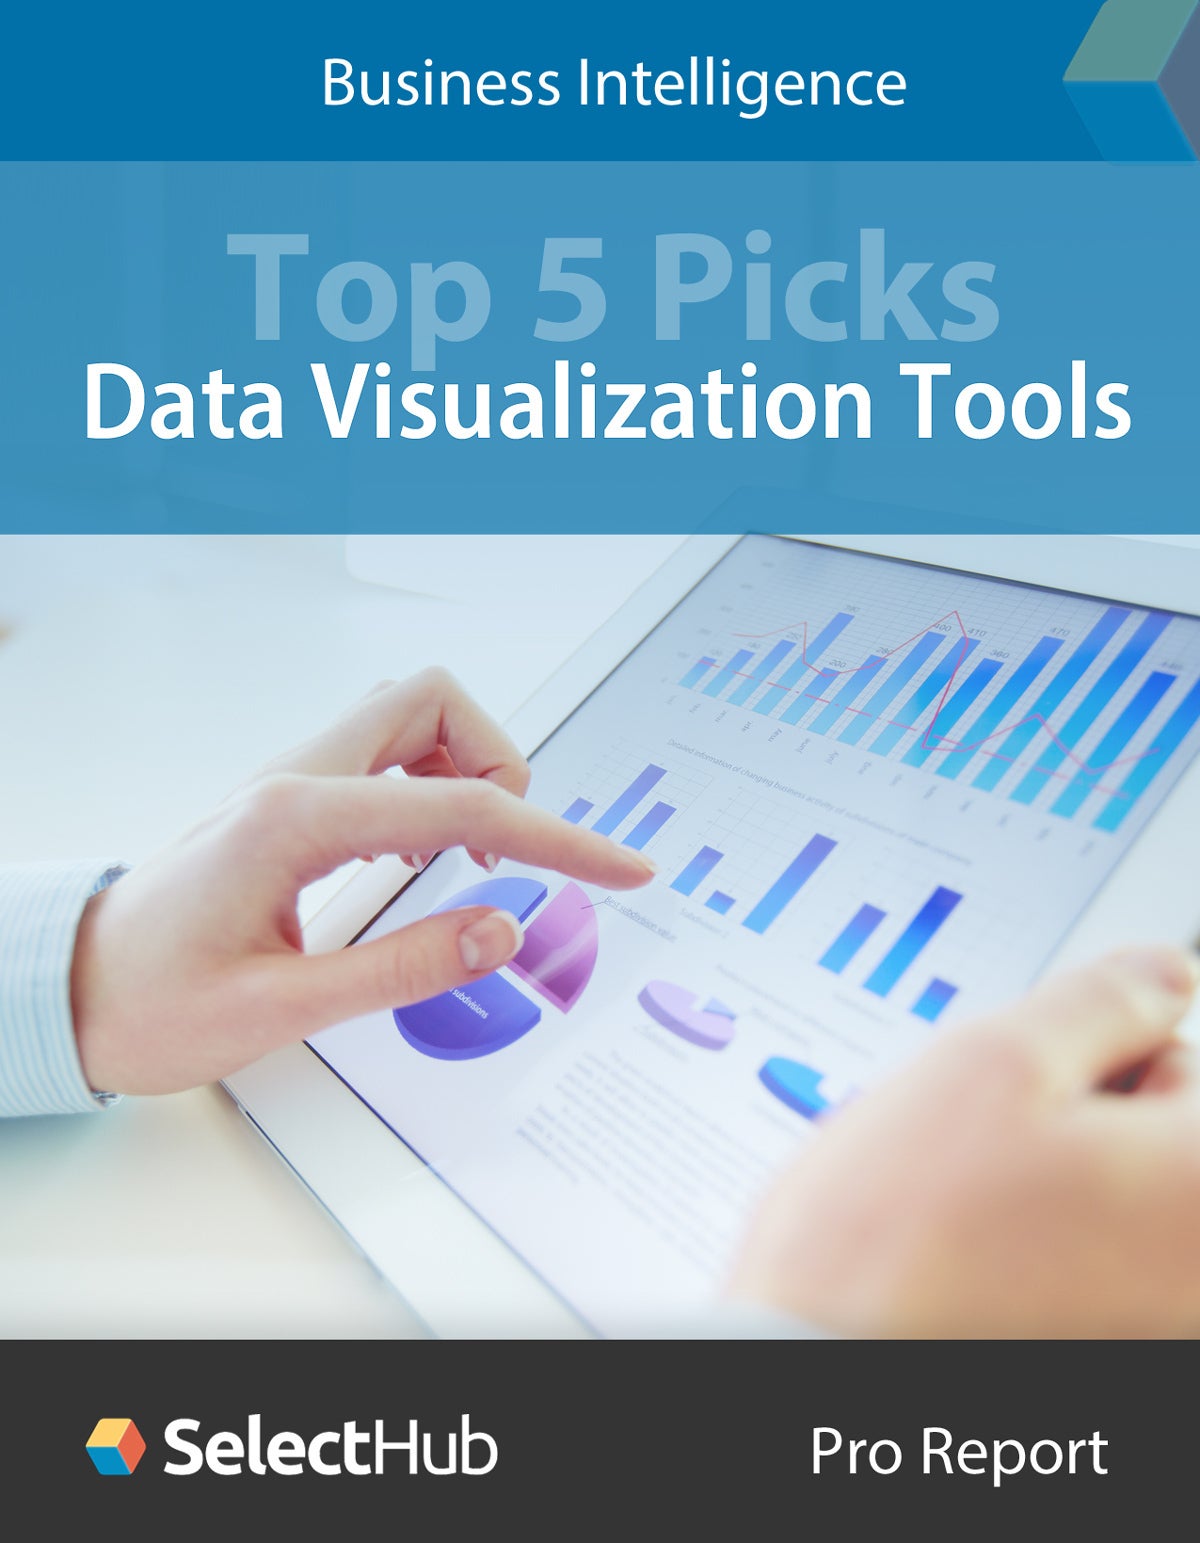 Image: Top 5 Data Visualization Tools―Evaluation, Pricing & Recommendations